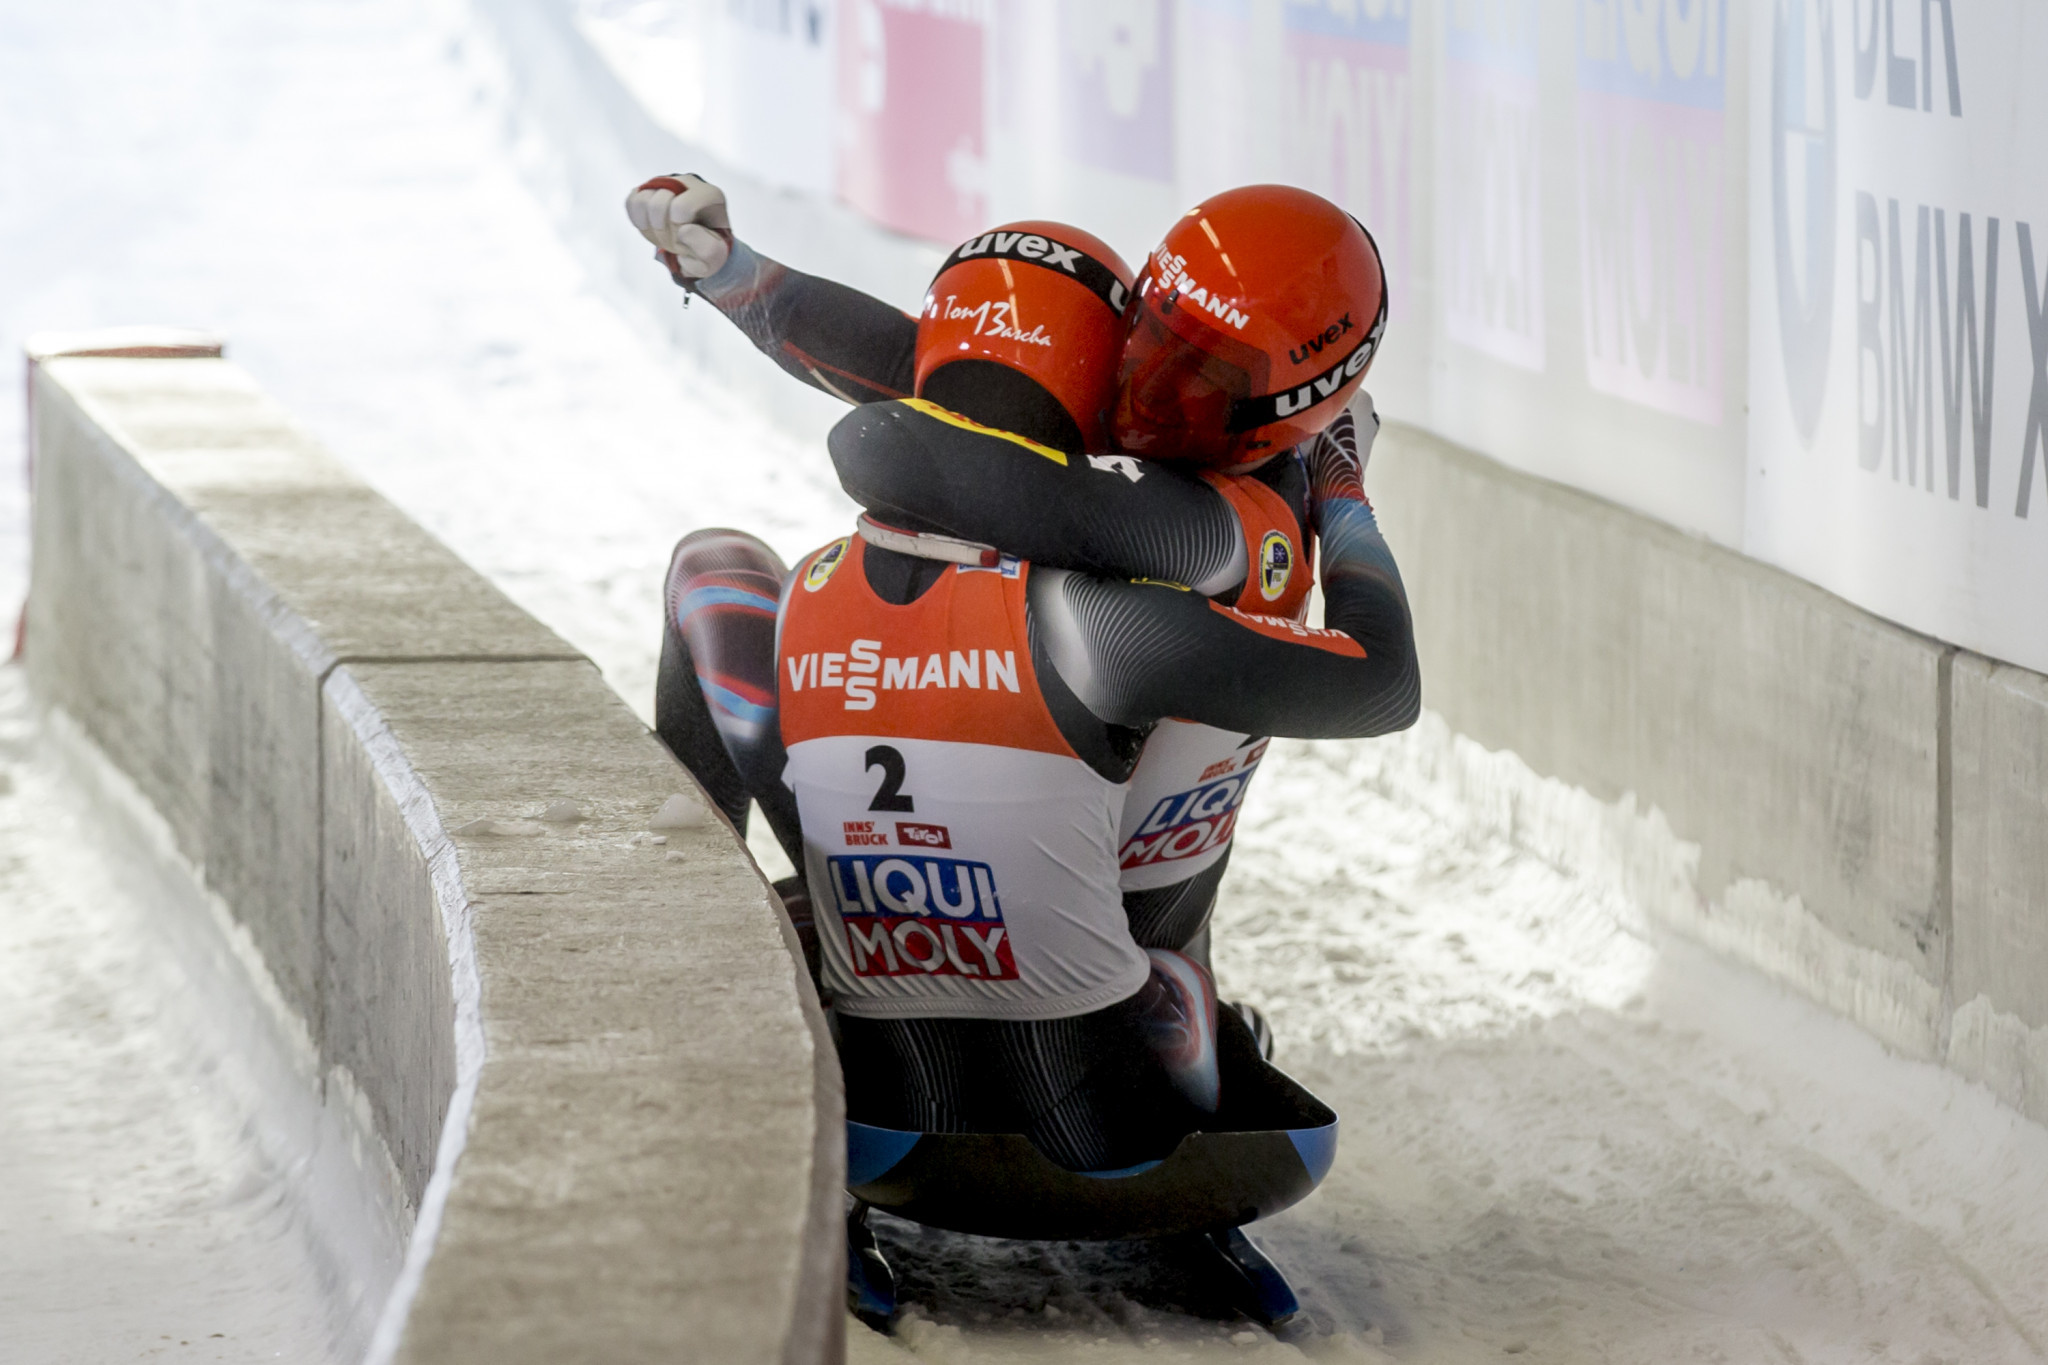 Toni Eggert and Sascha Benecken continued their dominance in the men's doubles event with a gold in Lake Placid ©Getty Images